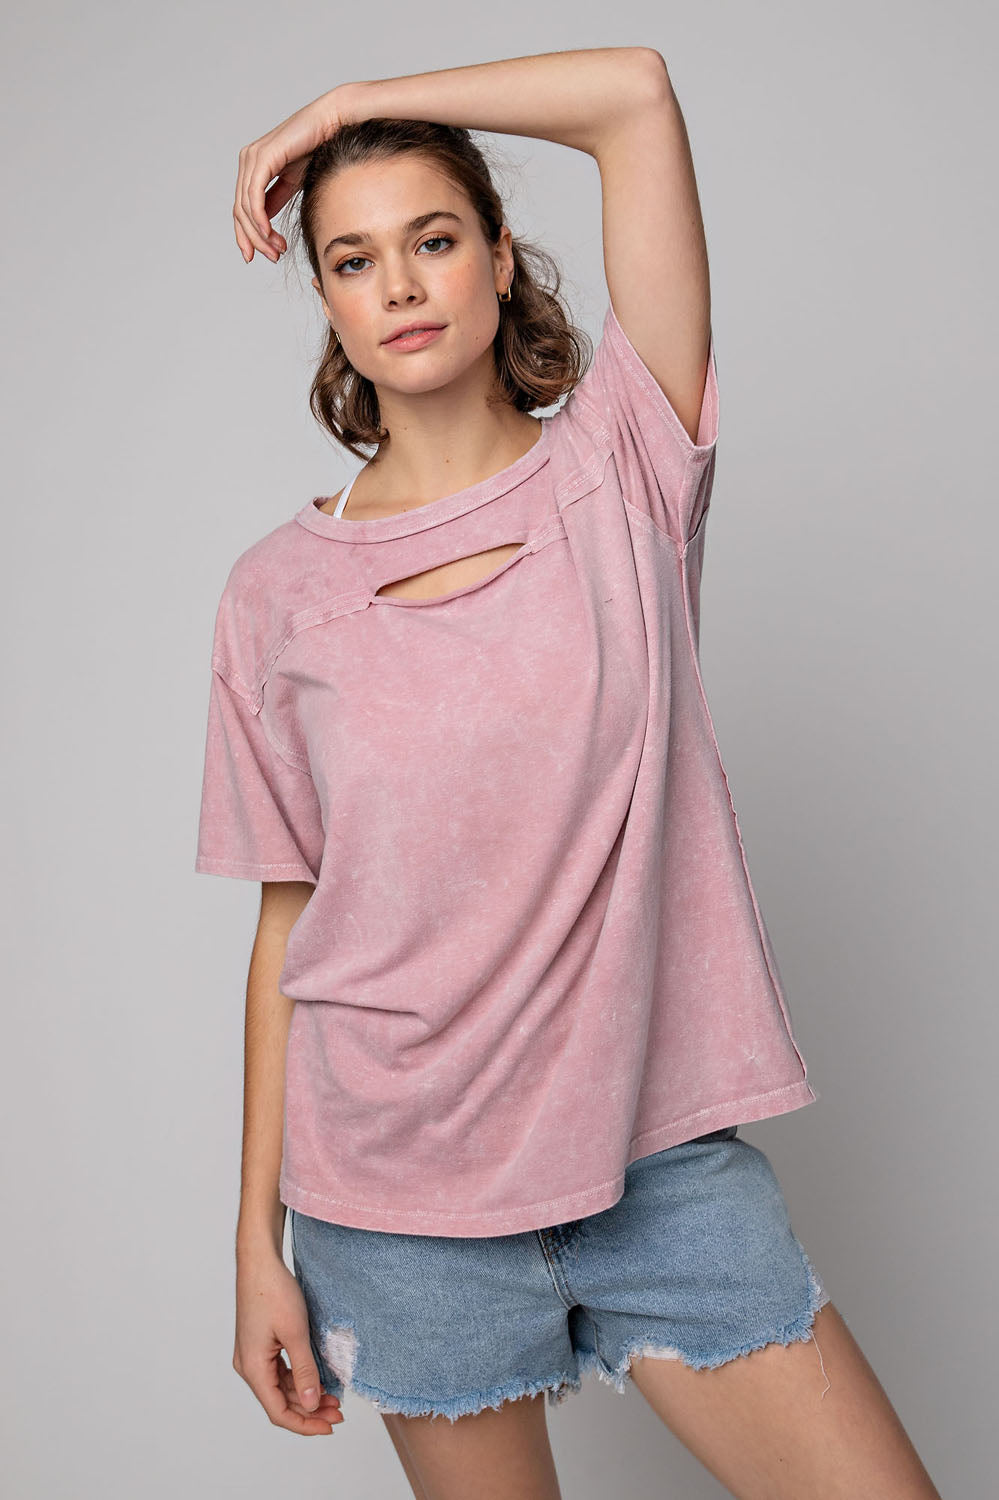 The Mineral Wash Keyhole Top